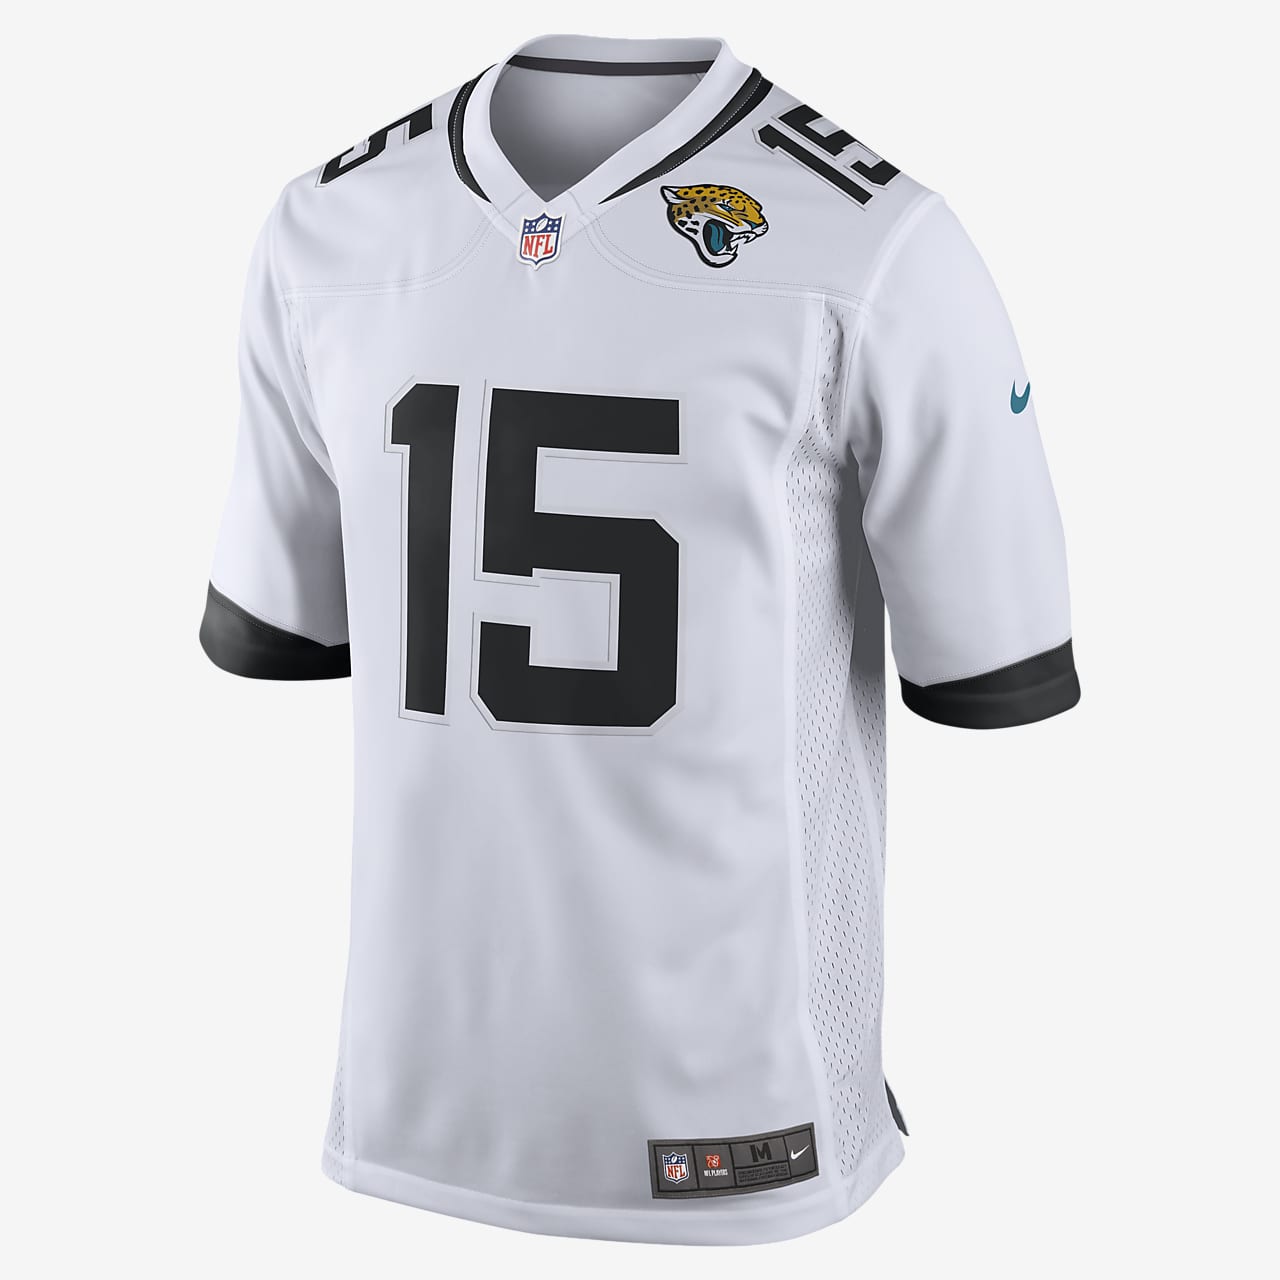 jacksonville jaguars jersey,Save up to 15%,www.ilcascinone.com